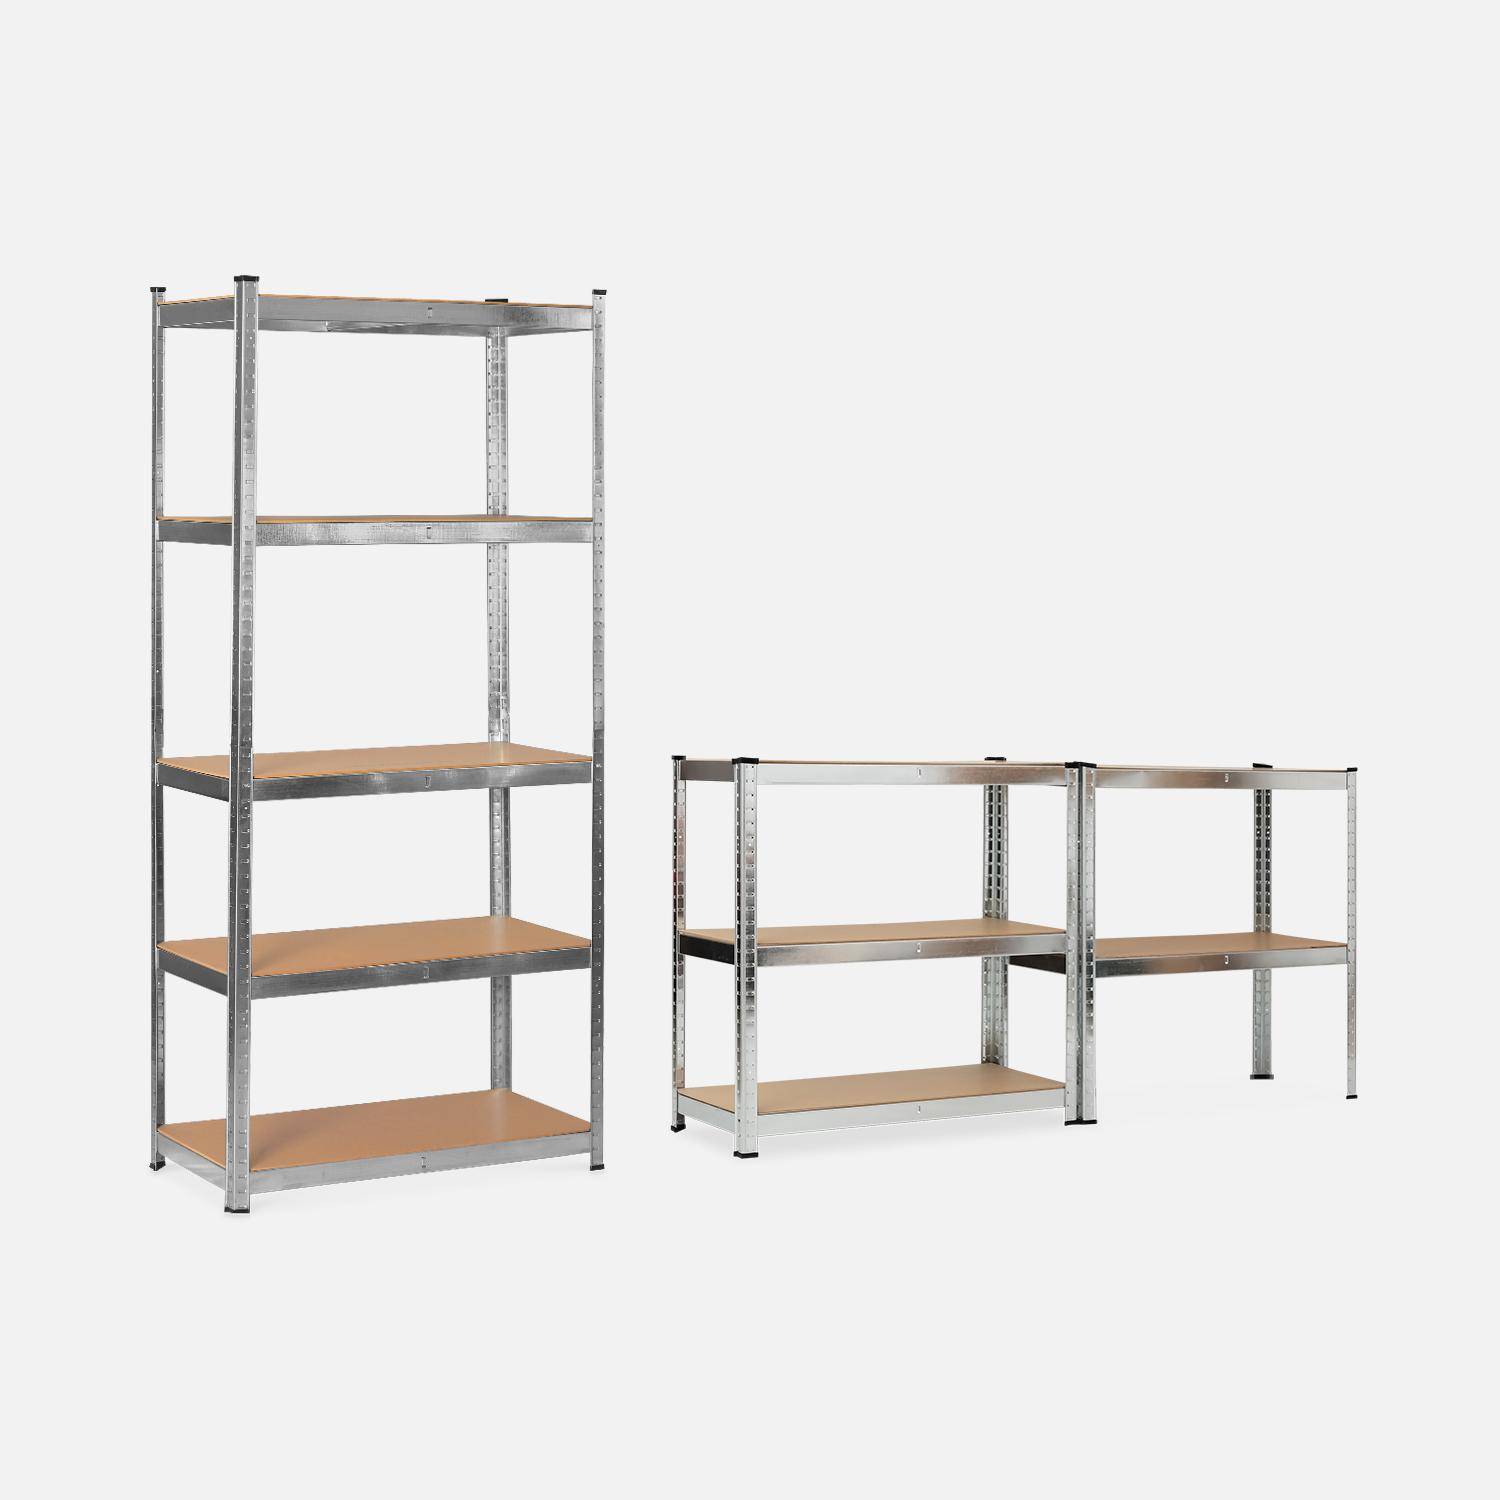 Set of 2 modular metal shelves for heavy loads - Modul - with 5 trays,sweeek,Photo2